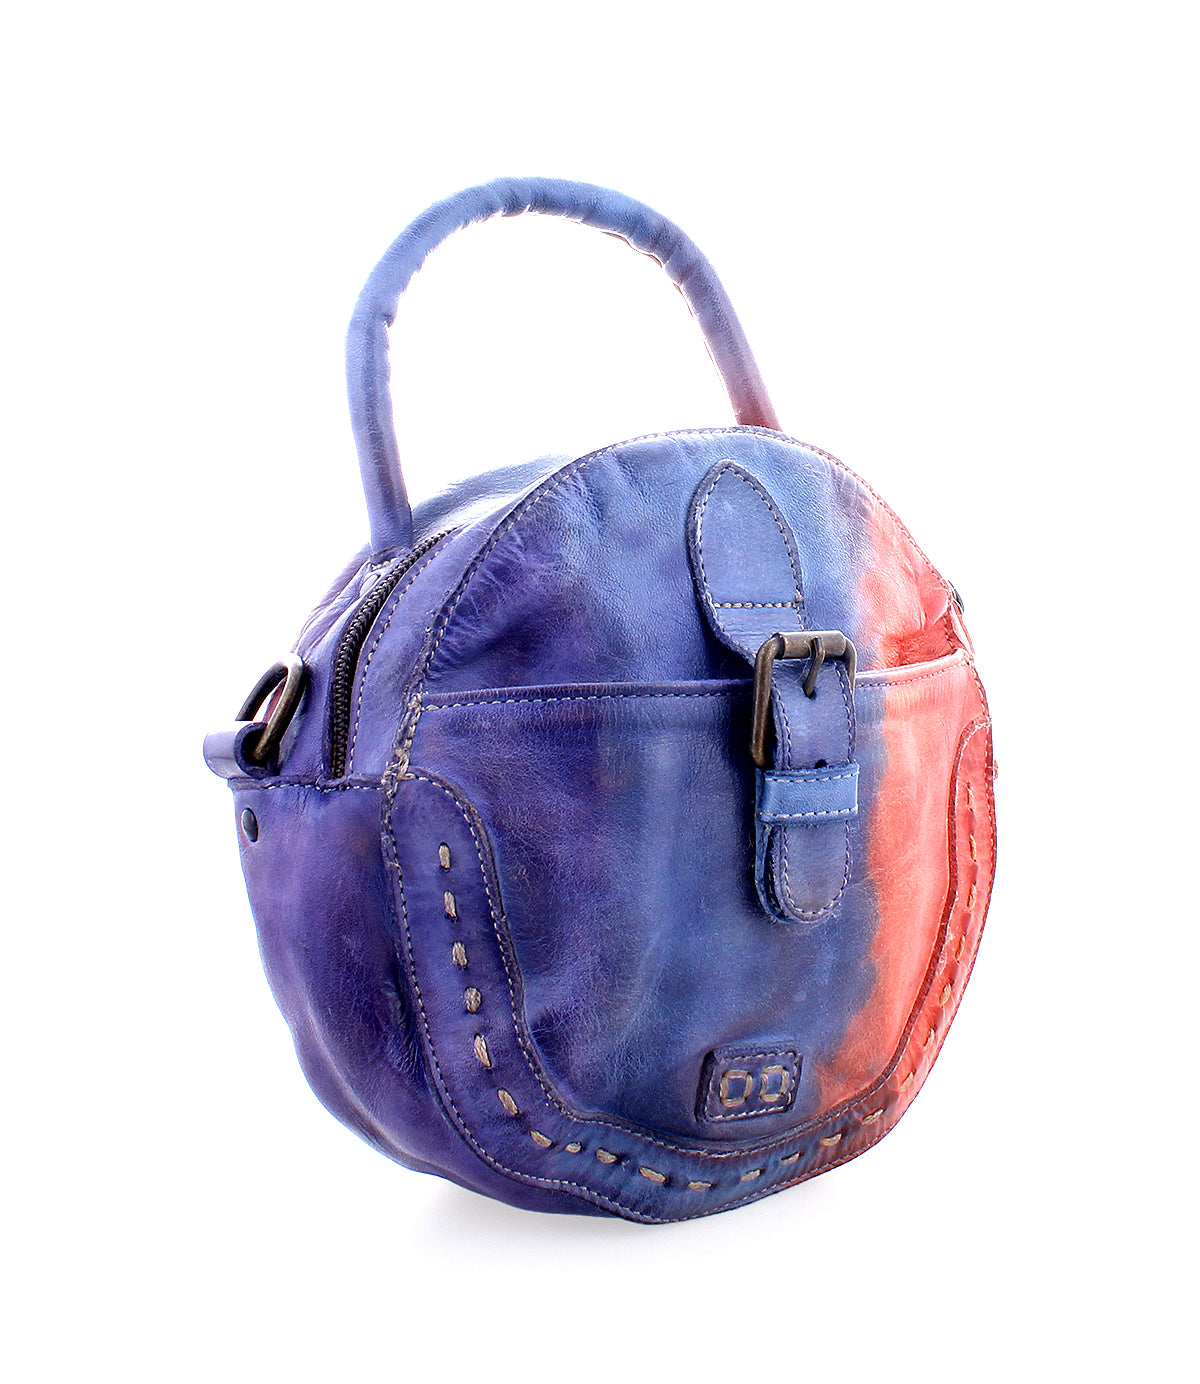 Circular blue and purple leather Bed Stu compact round crossbody handbag with stitching details, isolated on a white background.